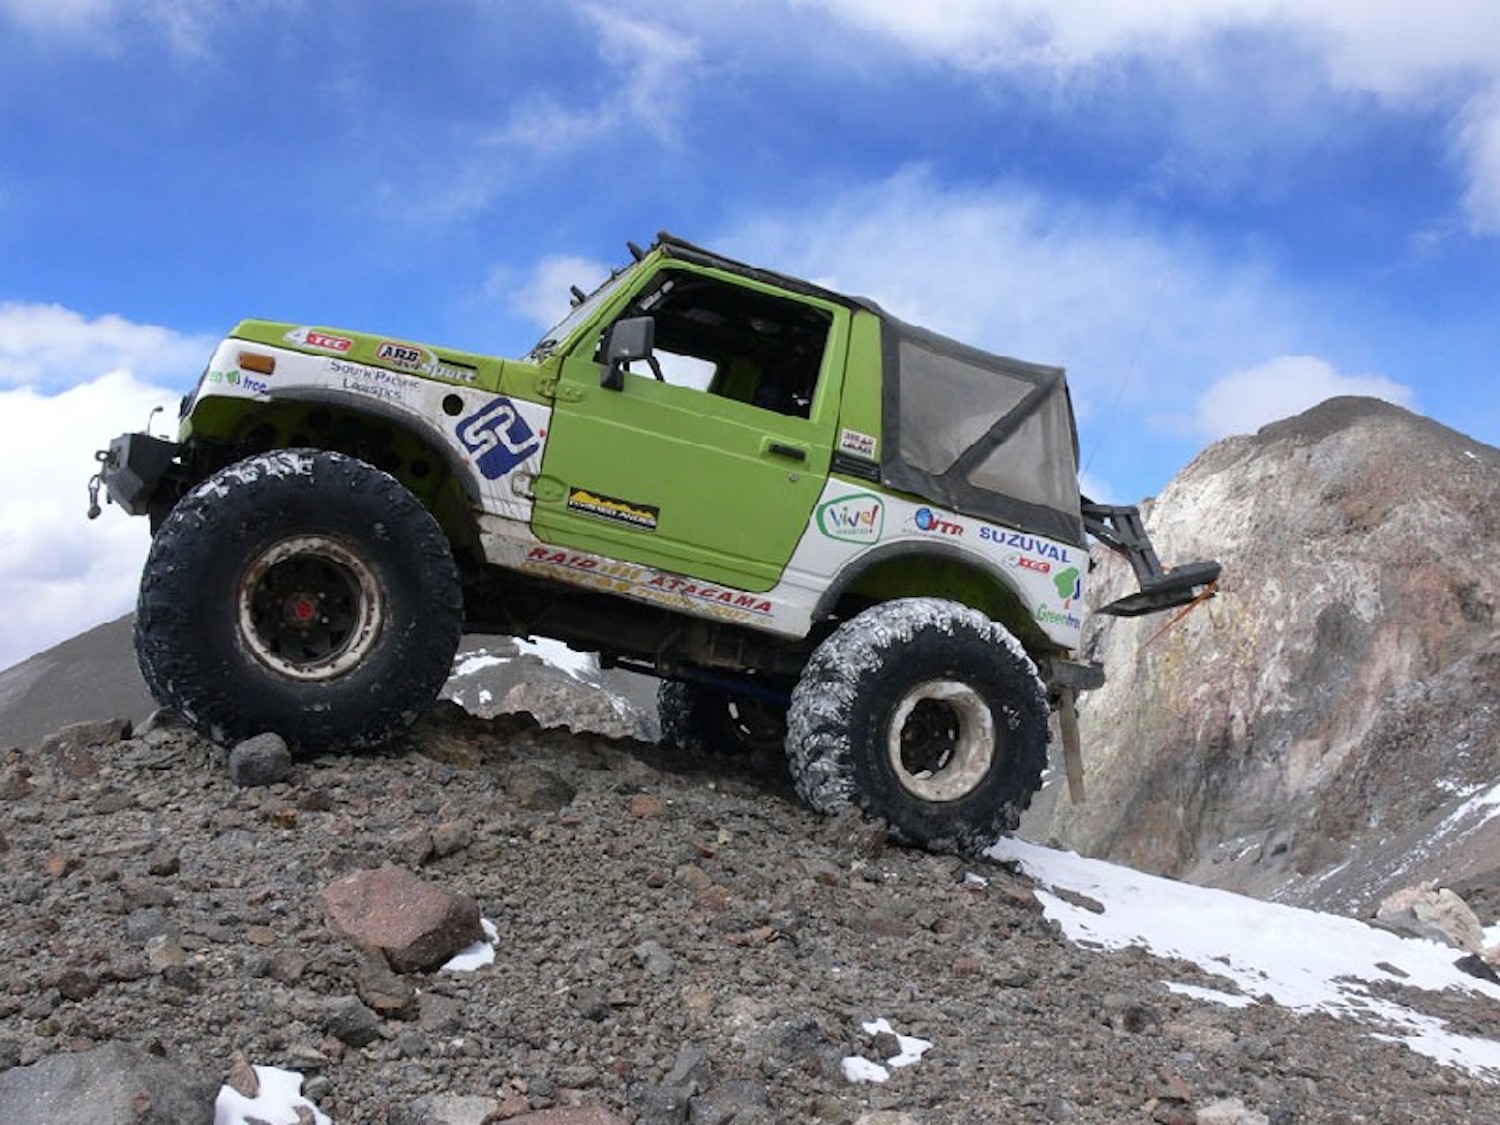 Green 1986 Suzuki Samurai parked on top of a mountain in Chile.